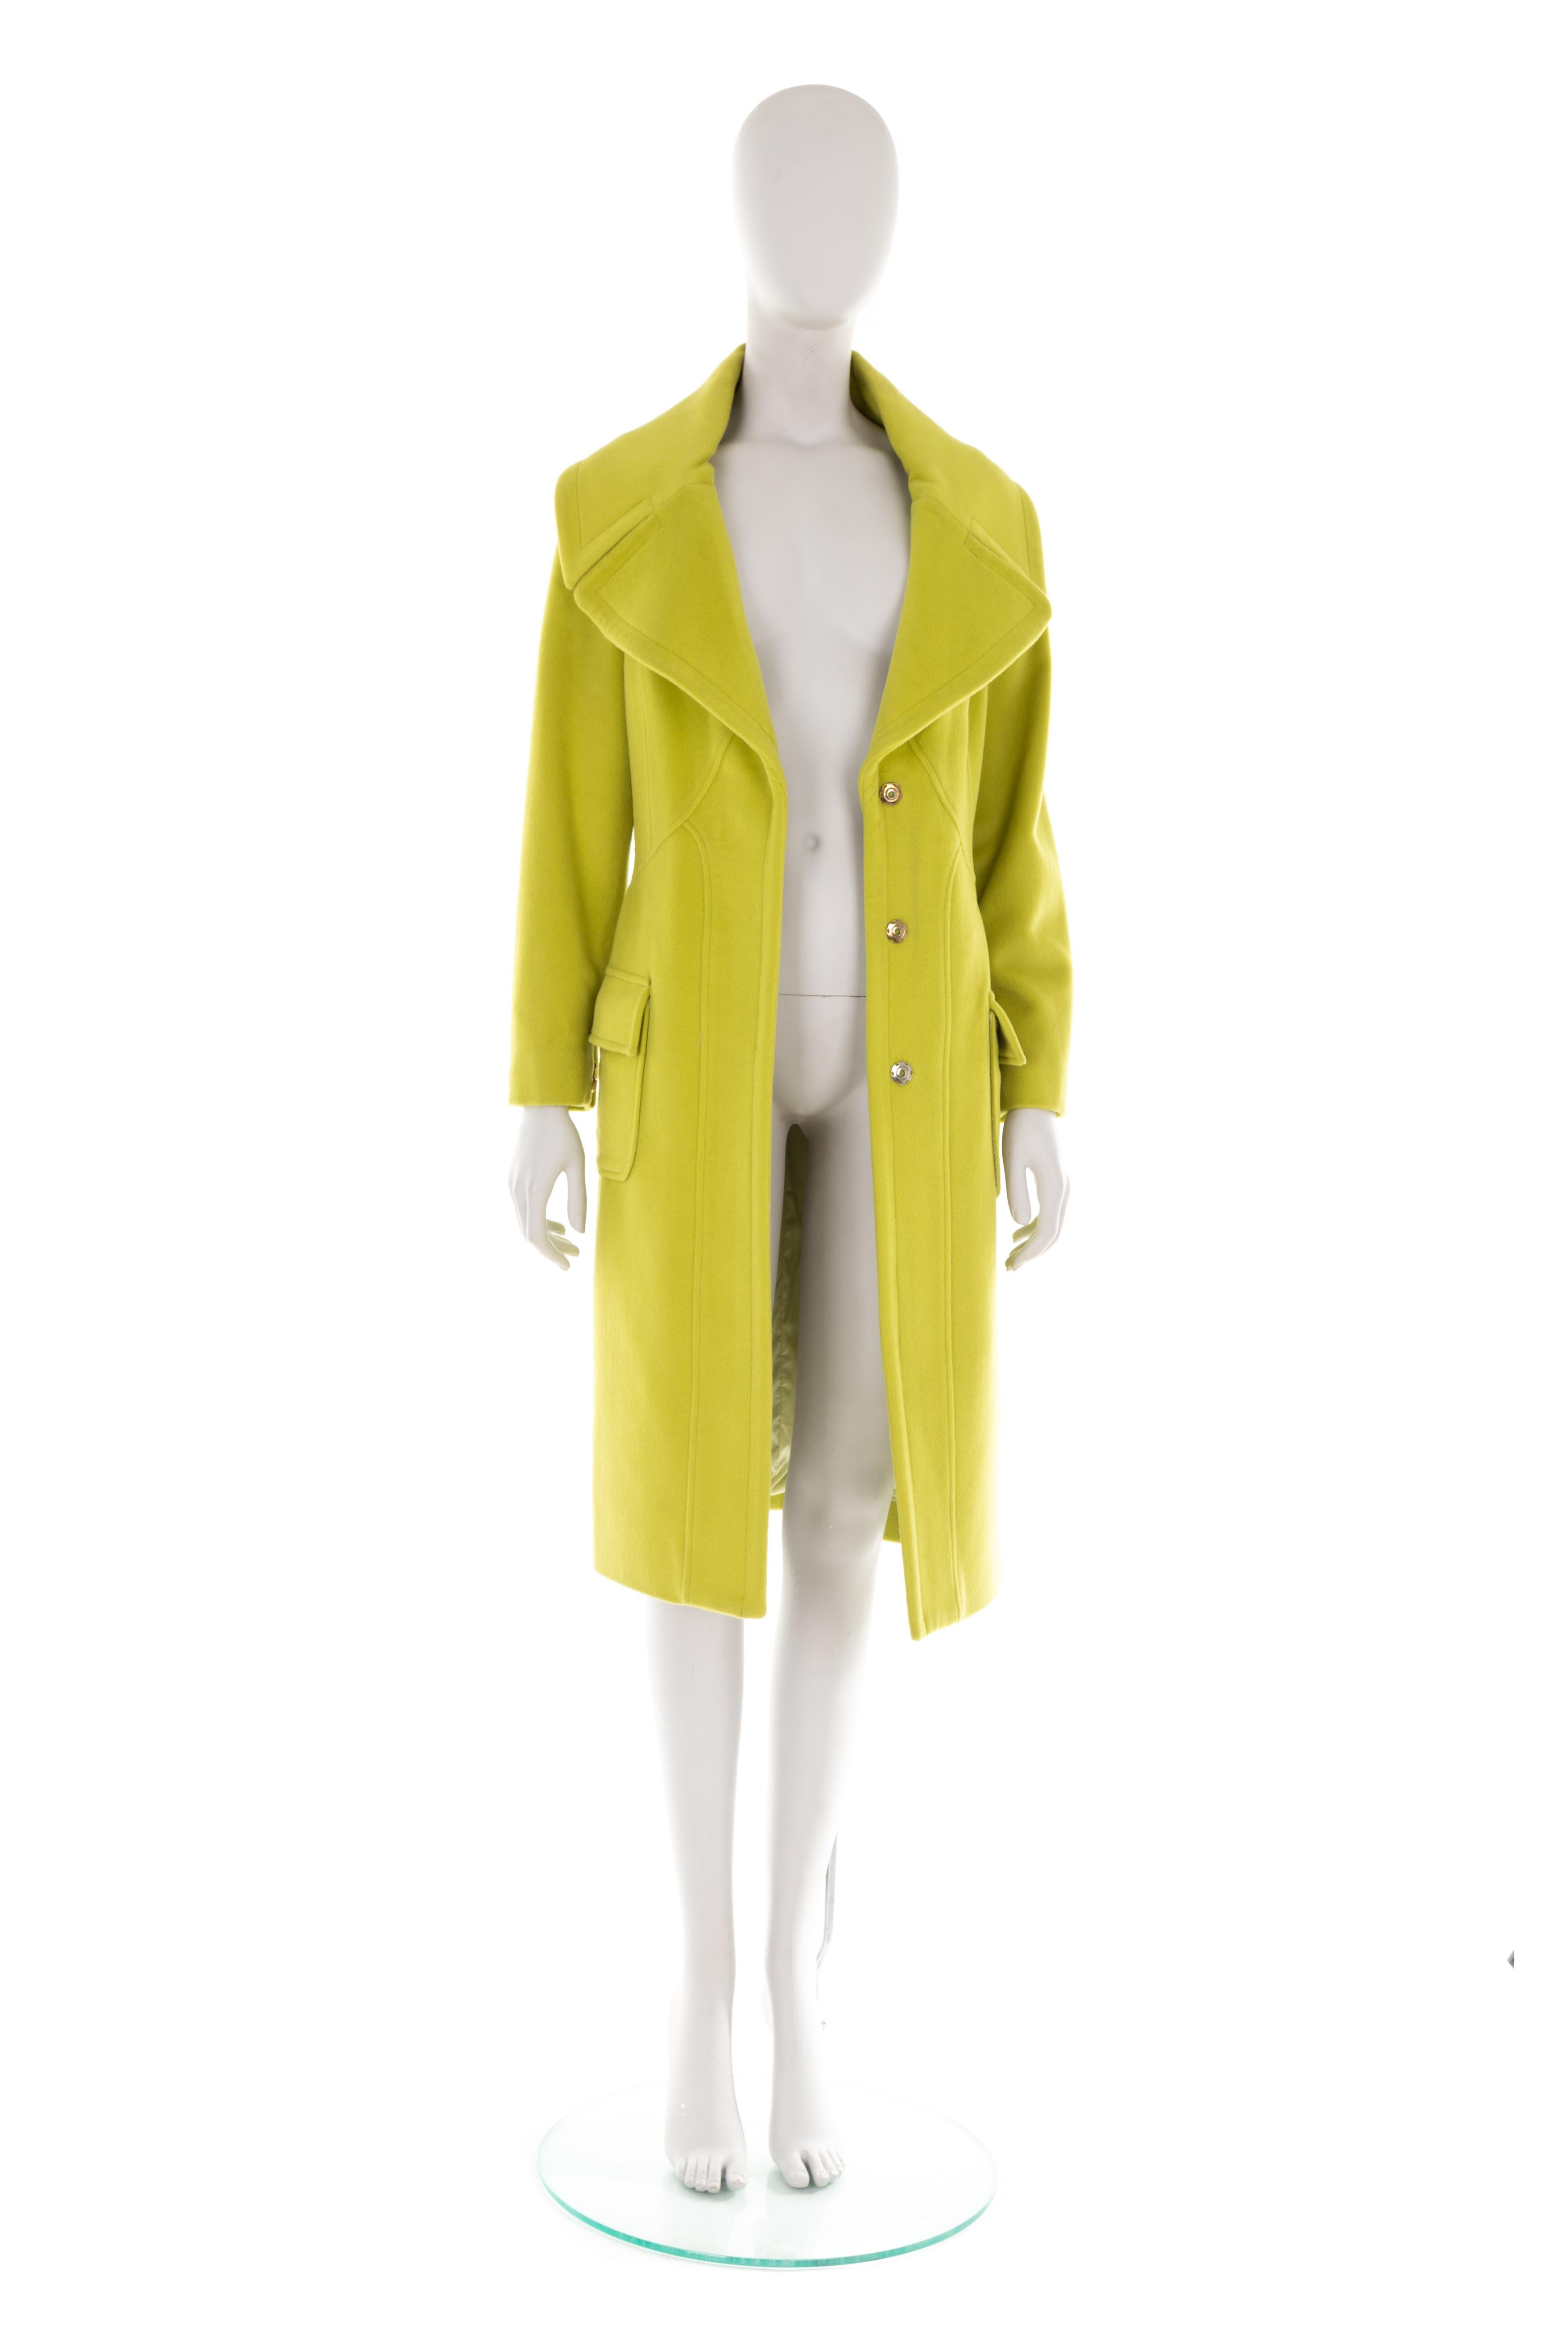 Versace by Donatella Versace F/W 2005 green Angora wool paneled coat In Excellent Condition For Sale In Rome, IT